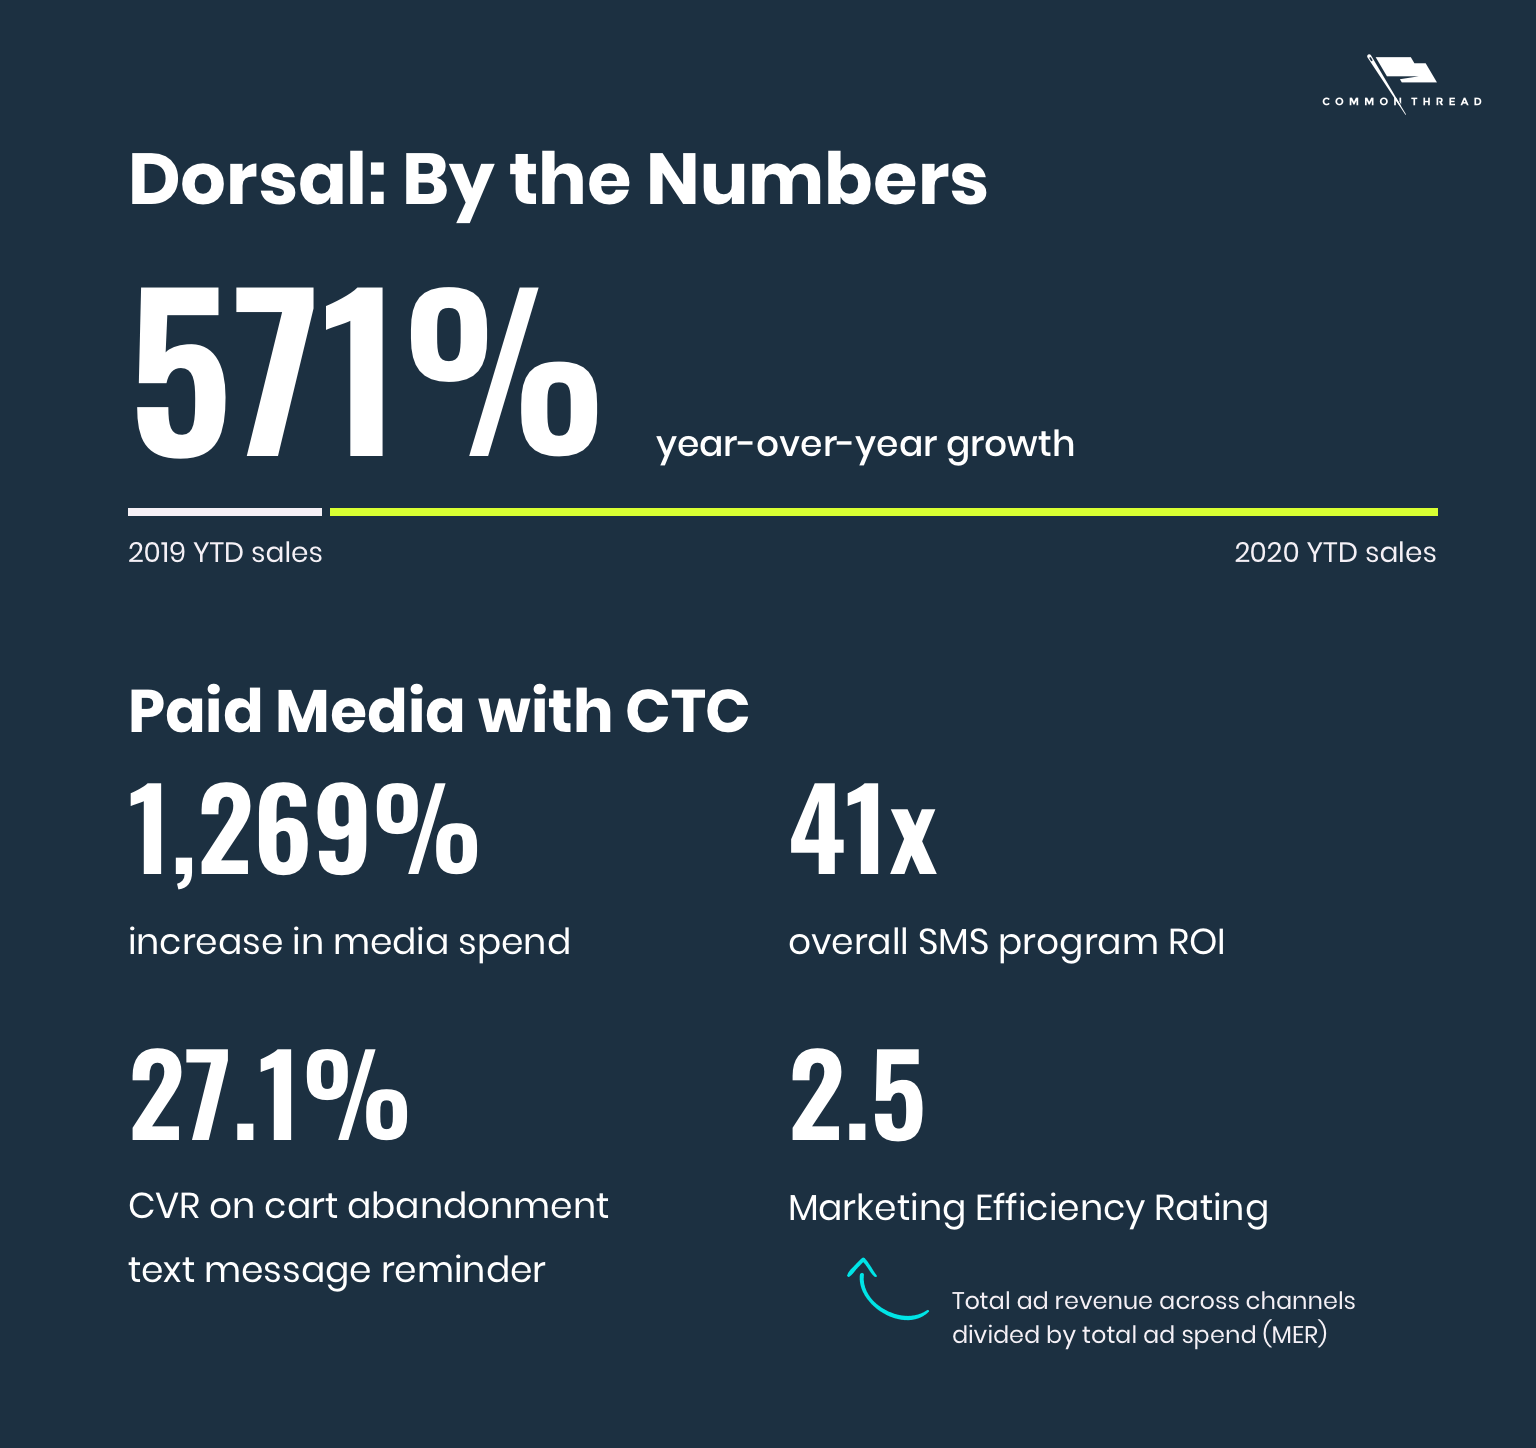 Dorsal: By the numbers